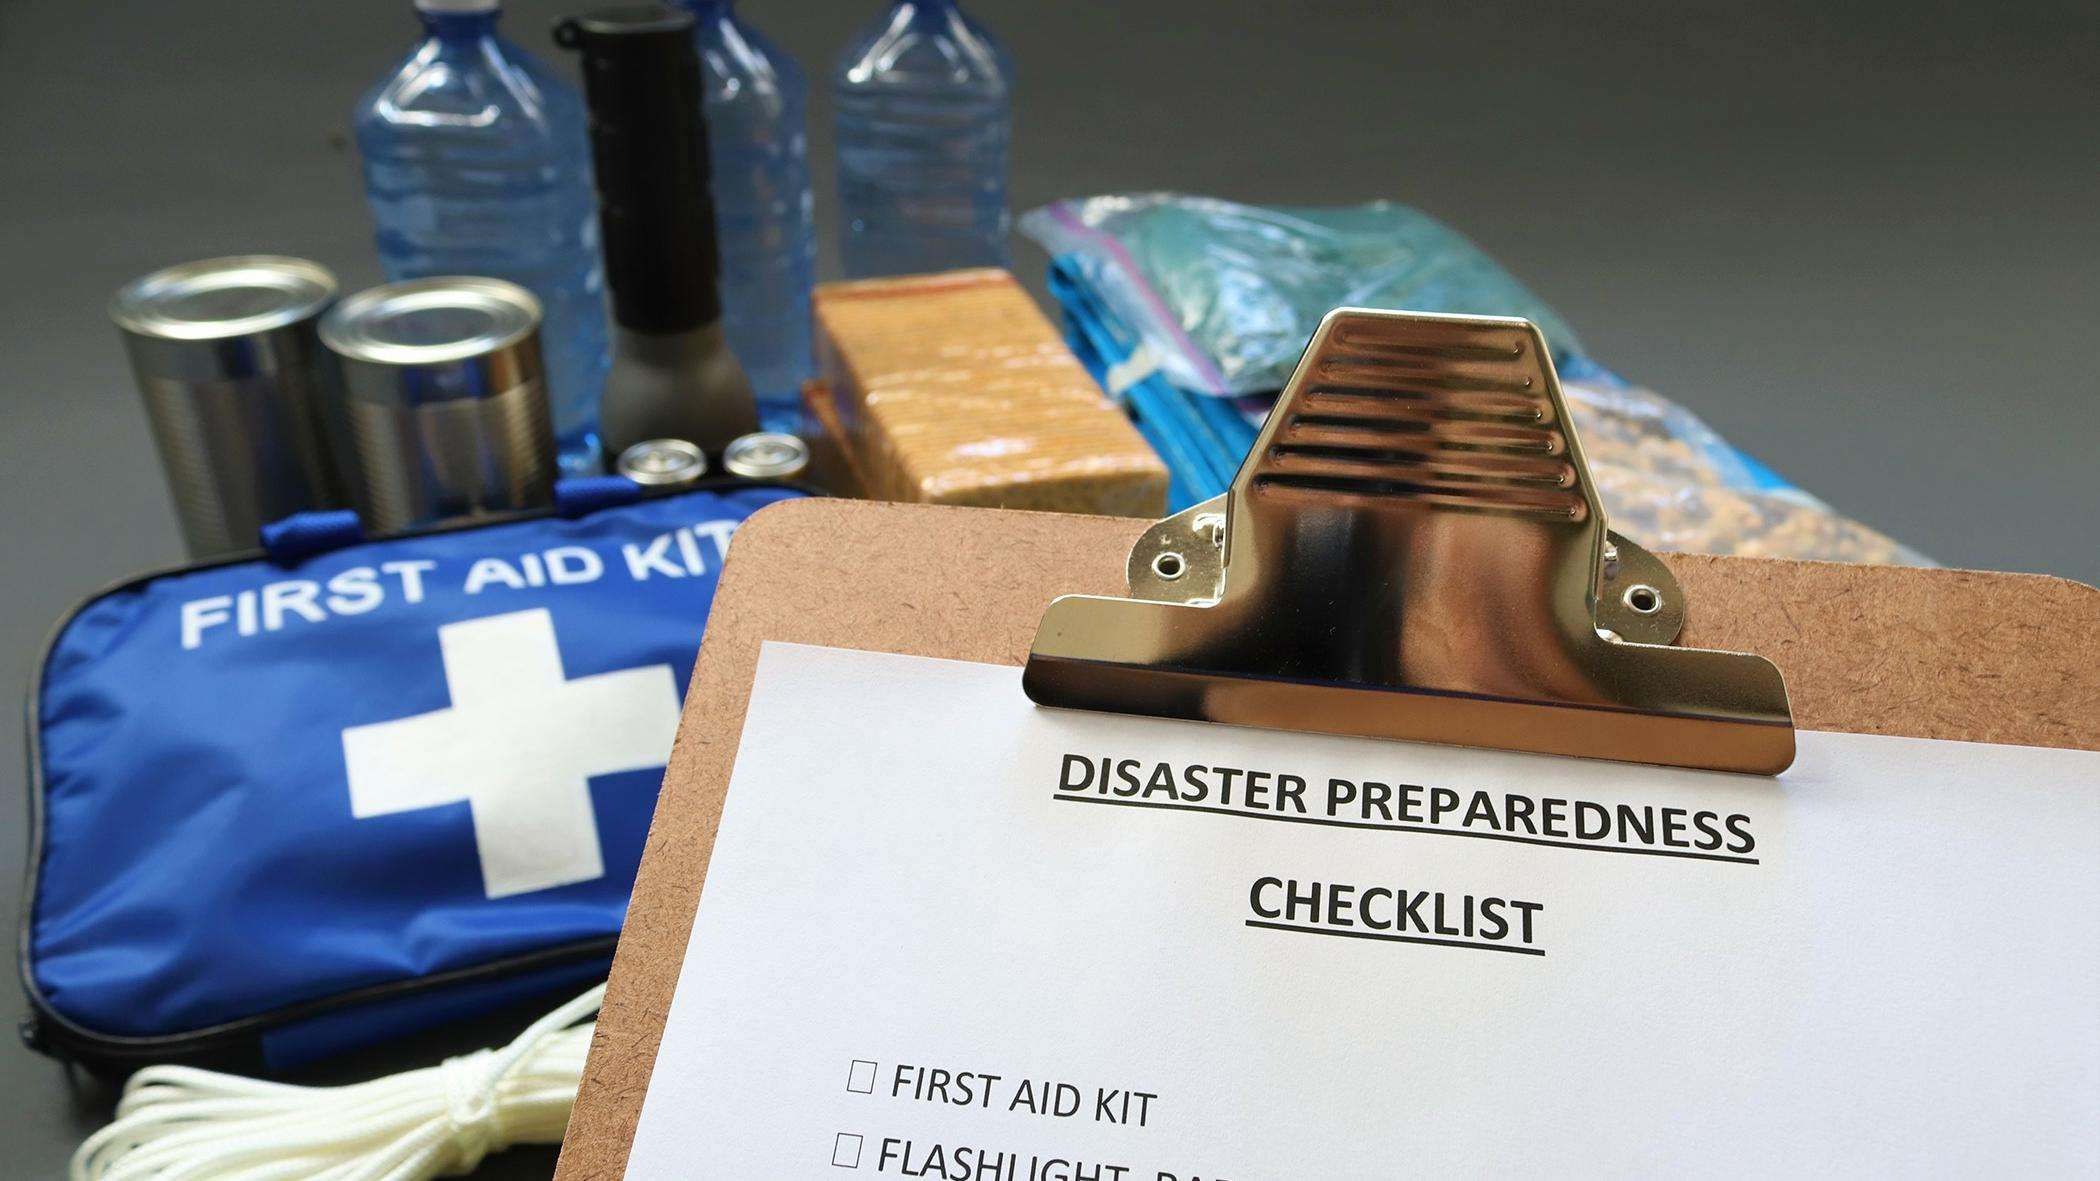 Disaster preparedness checklist on a clipboard with disaster relief items in the background